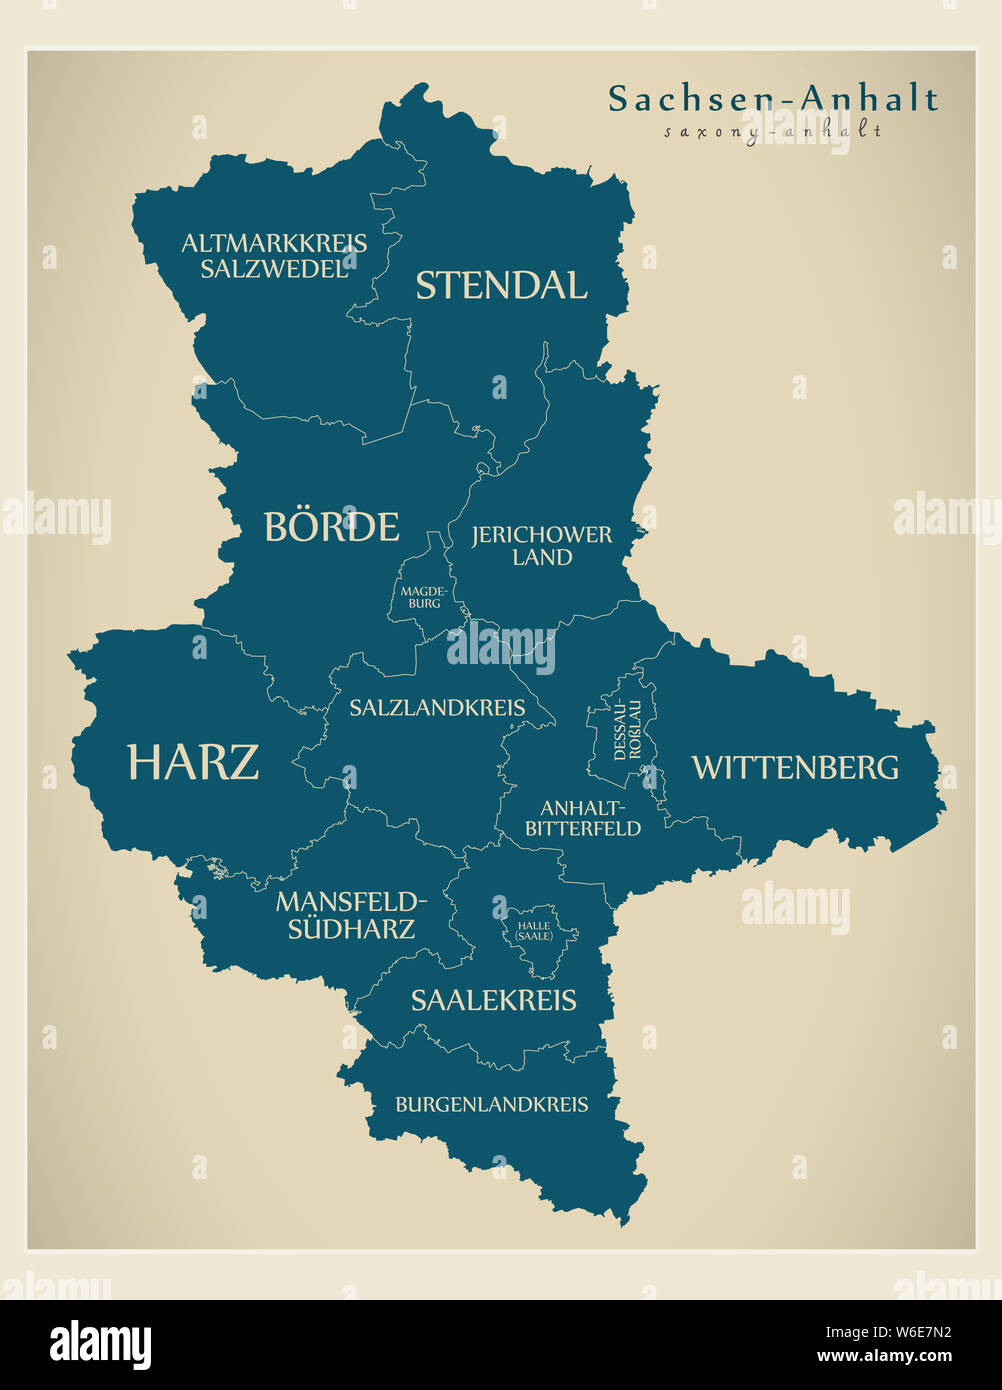 Modern Map - Saxony-Anhalt map of Germany with counties and labels Stock Photo